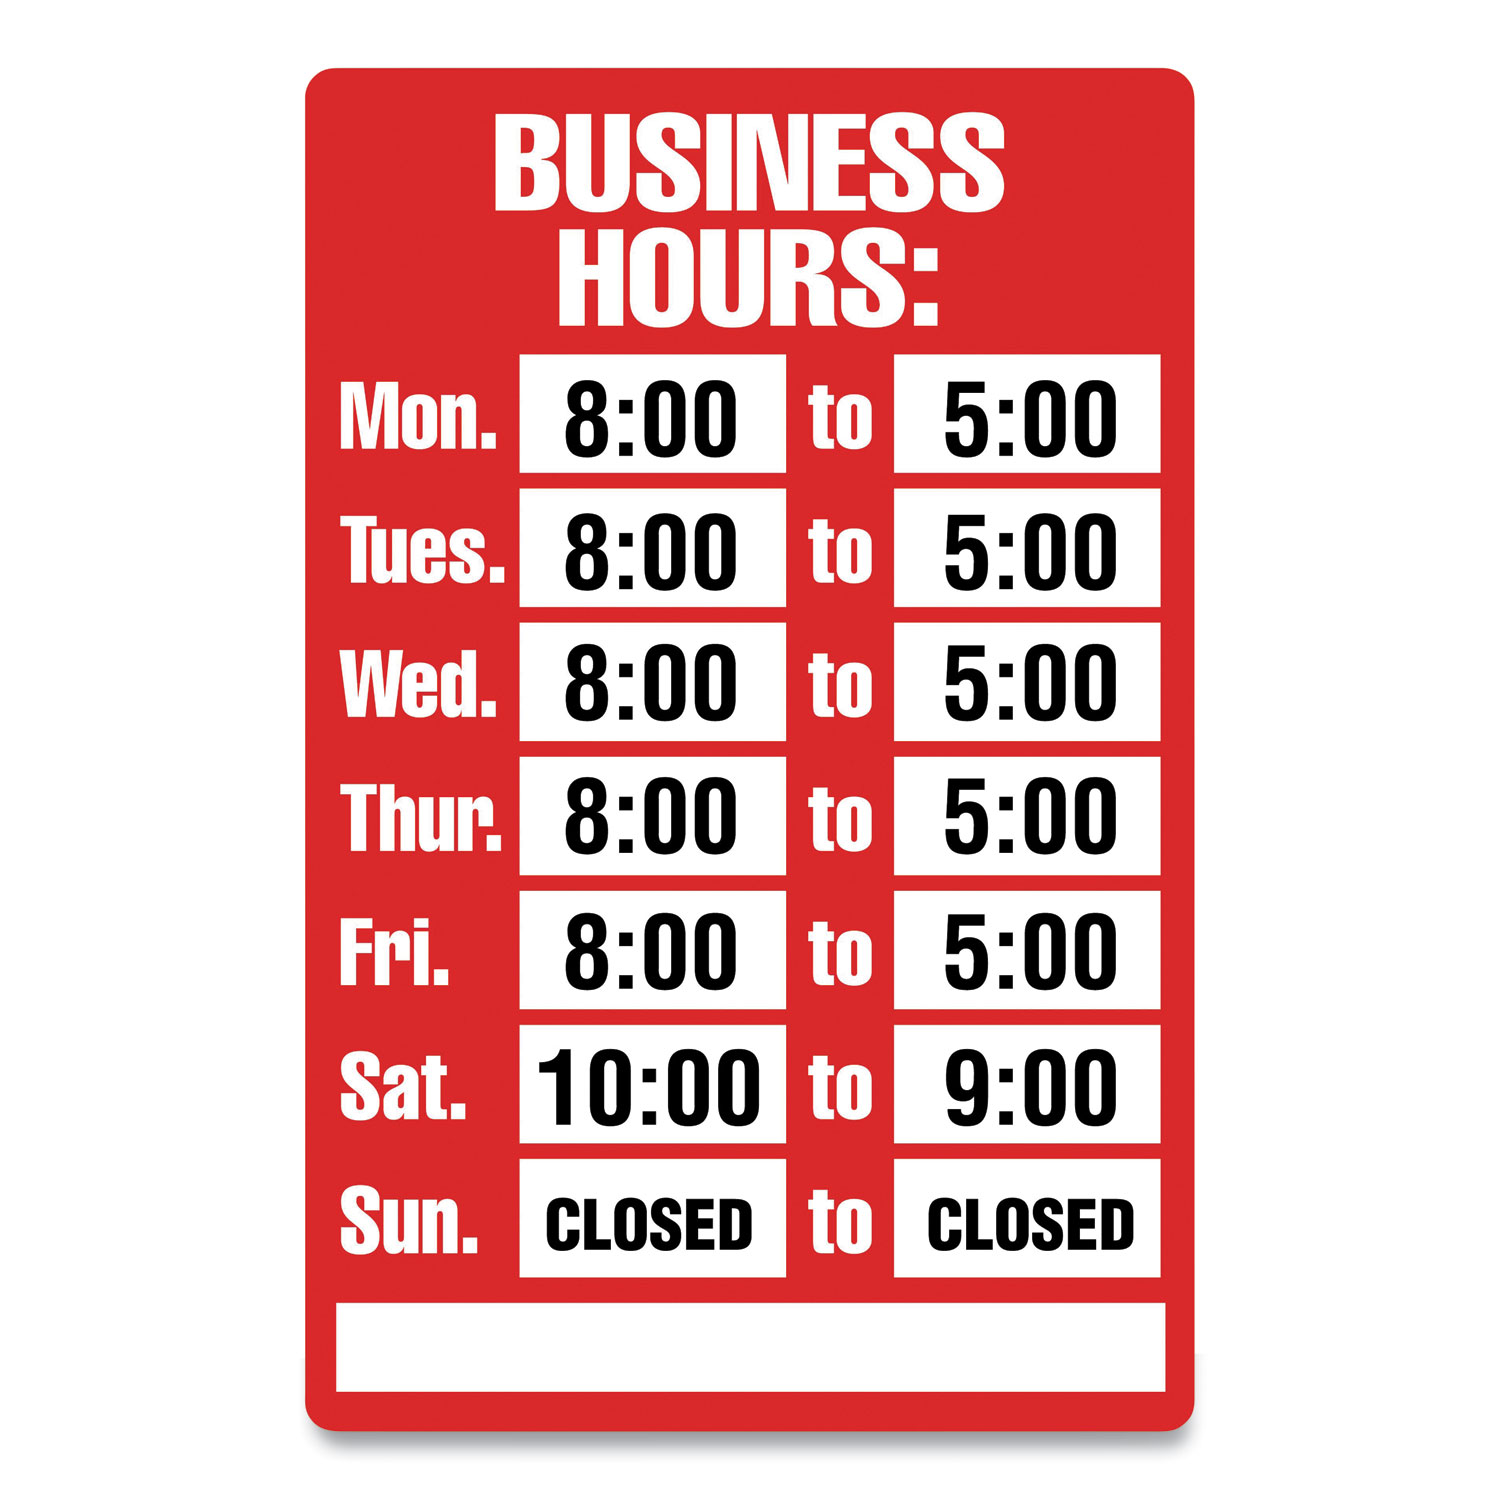 Business hours. Business hours closed. Closed Business. Company hours of Operation sign.